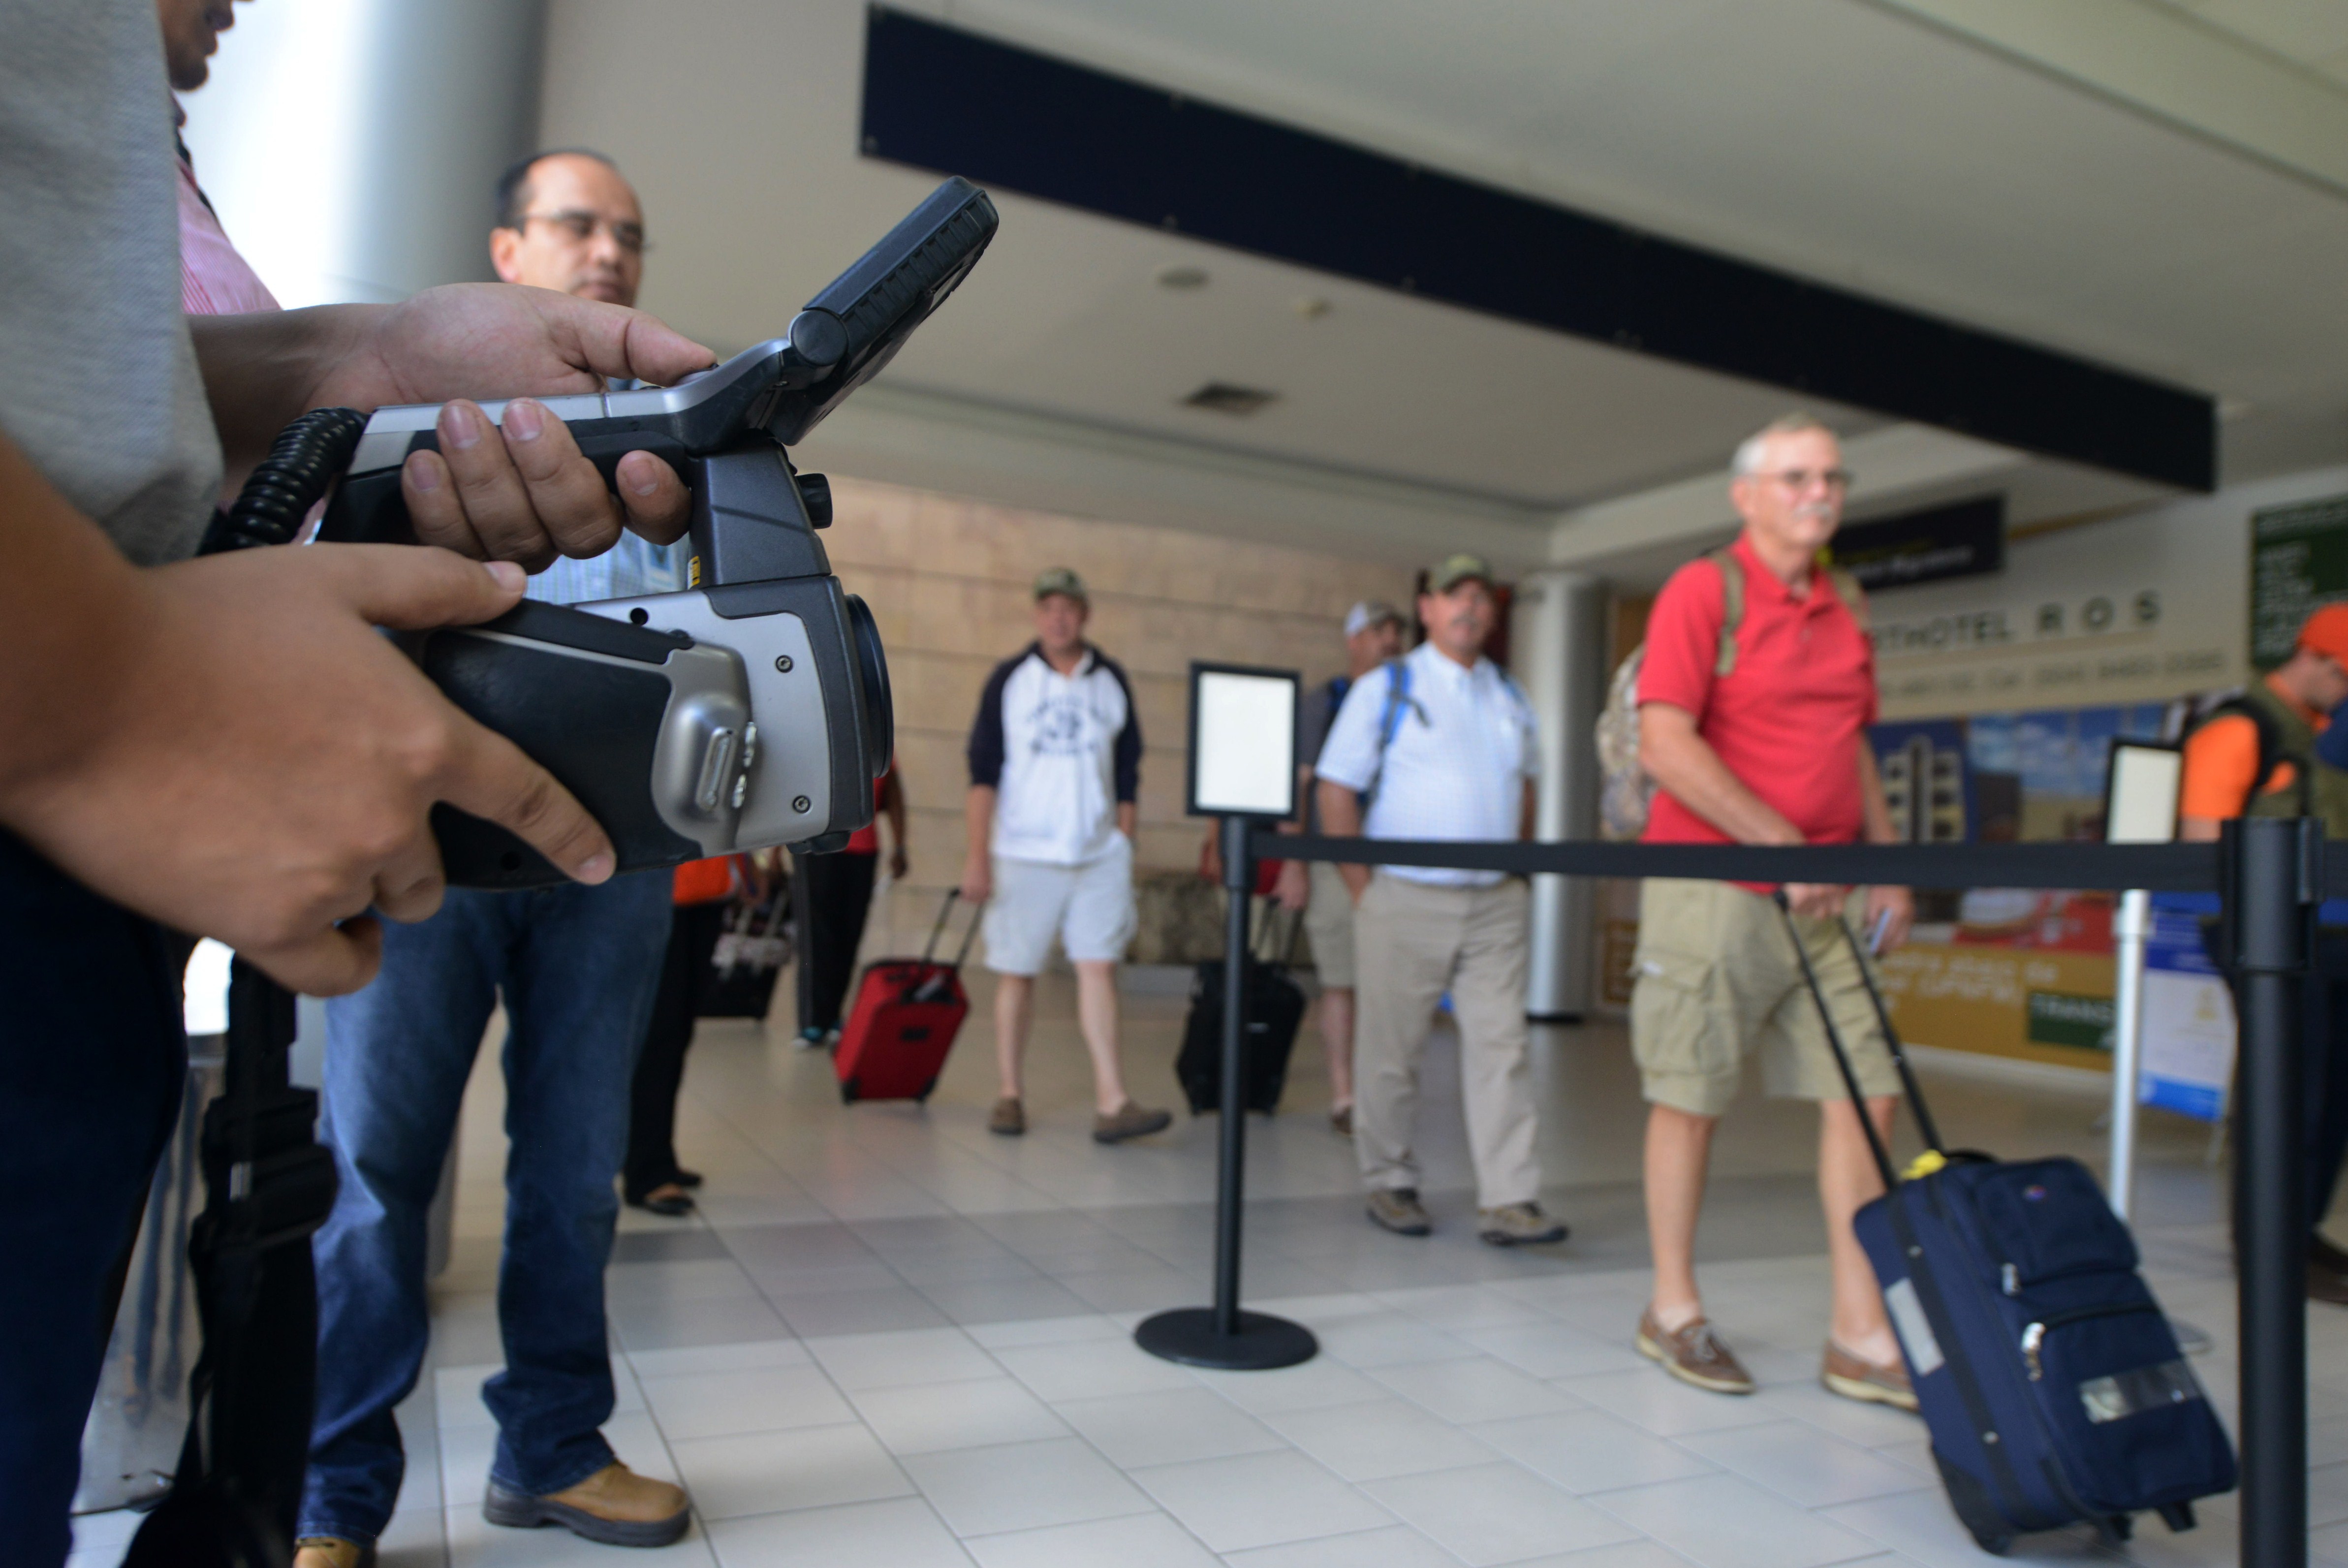 Honduras' Health personnel screen arriving passengers for the deadly Ebola virus at Tegucigalpa's Toncontin international airport on October 20, 2014. (ORLANDO SIERRA&mdash;AFP/Getty Images)